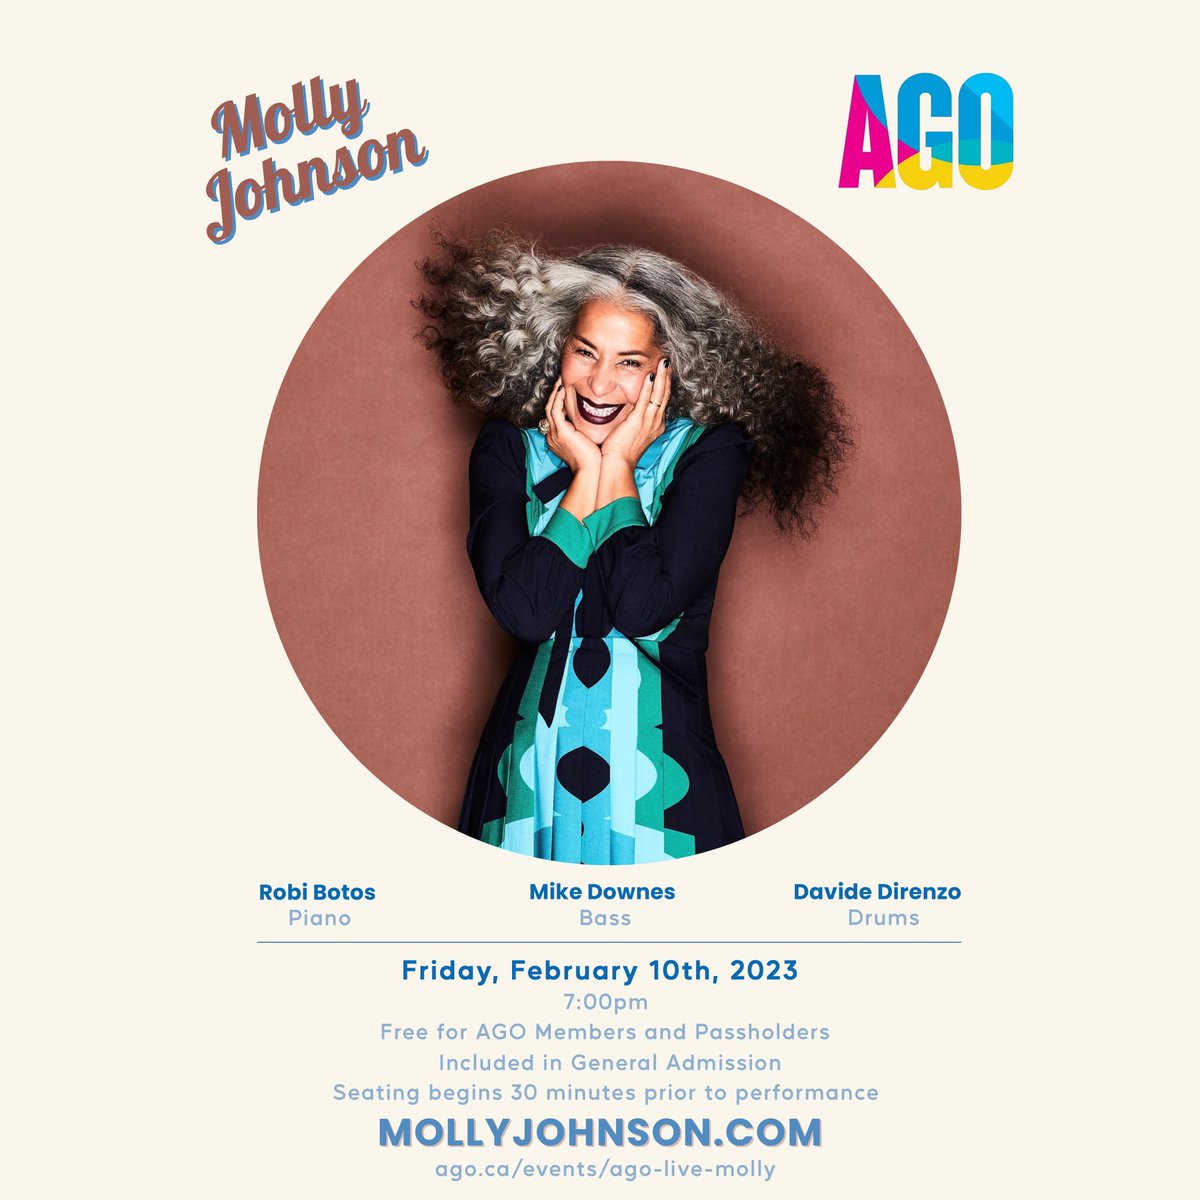 I’m performing at the @agotoronto this Friday, February 10th, 7pm in the AGO’s stunning Walker Court. The show is free for AGO Members and Annual Passholders, and included in General Admission.
#mollyjohnson #mollyjohnsonfoundation #agotoronto #jazz #canadianjazz #womeninjazz